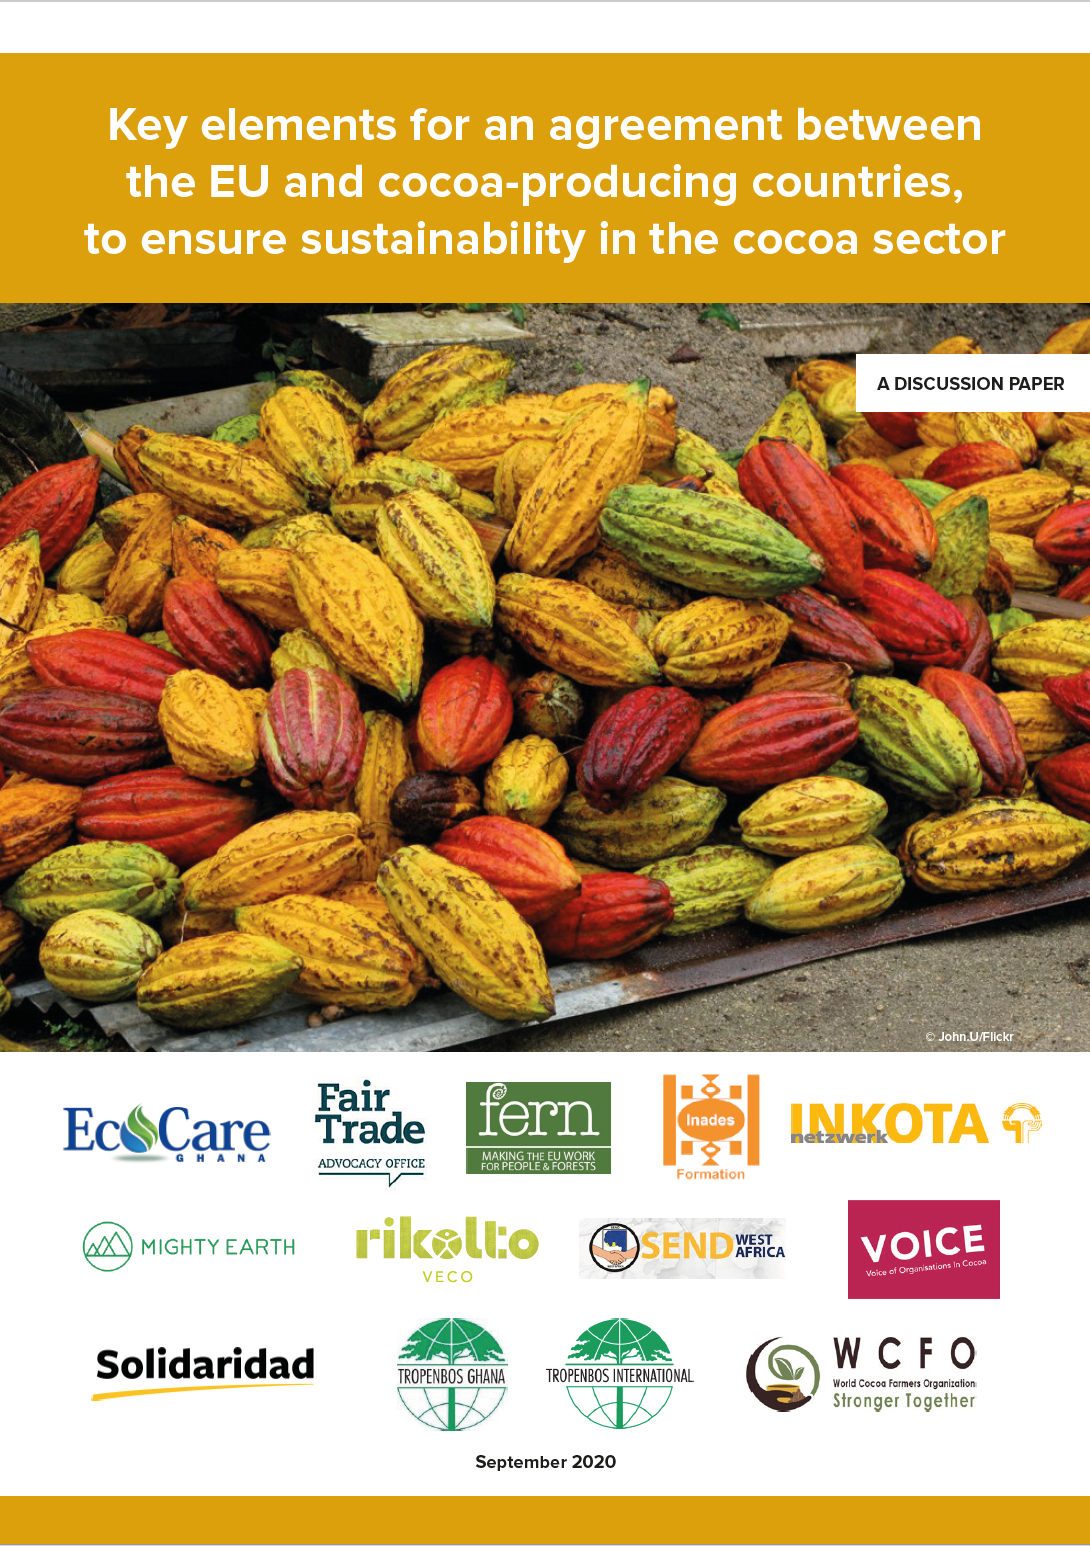 Key elements for an agreement between the EU and cocoa-producing countries, to ensure sustainability in the cocoa sector